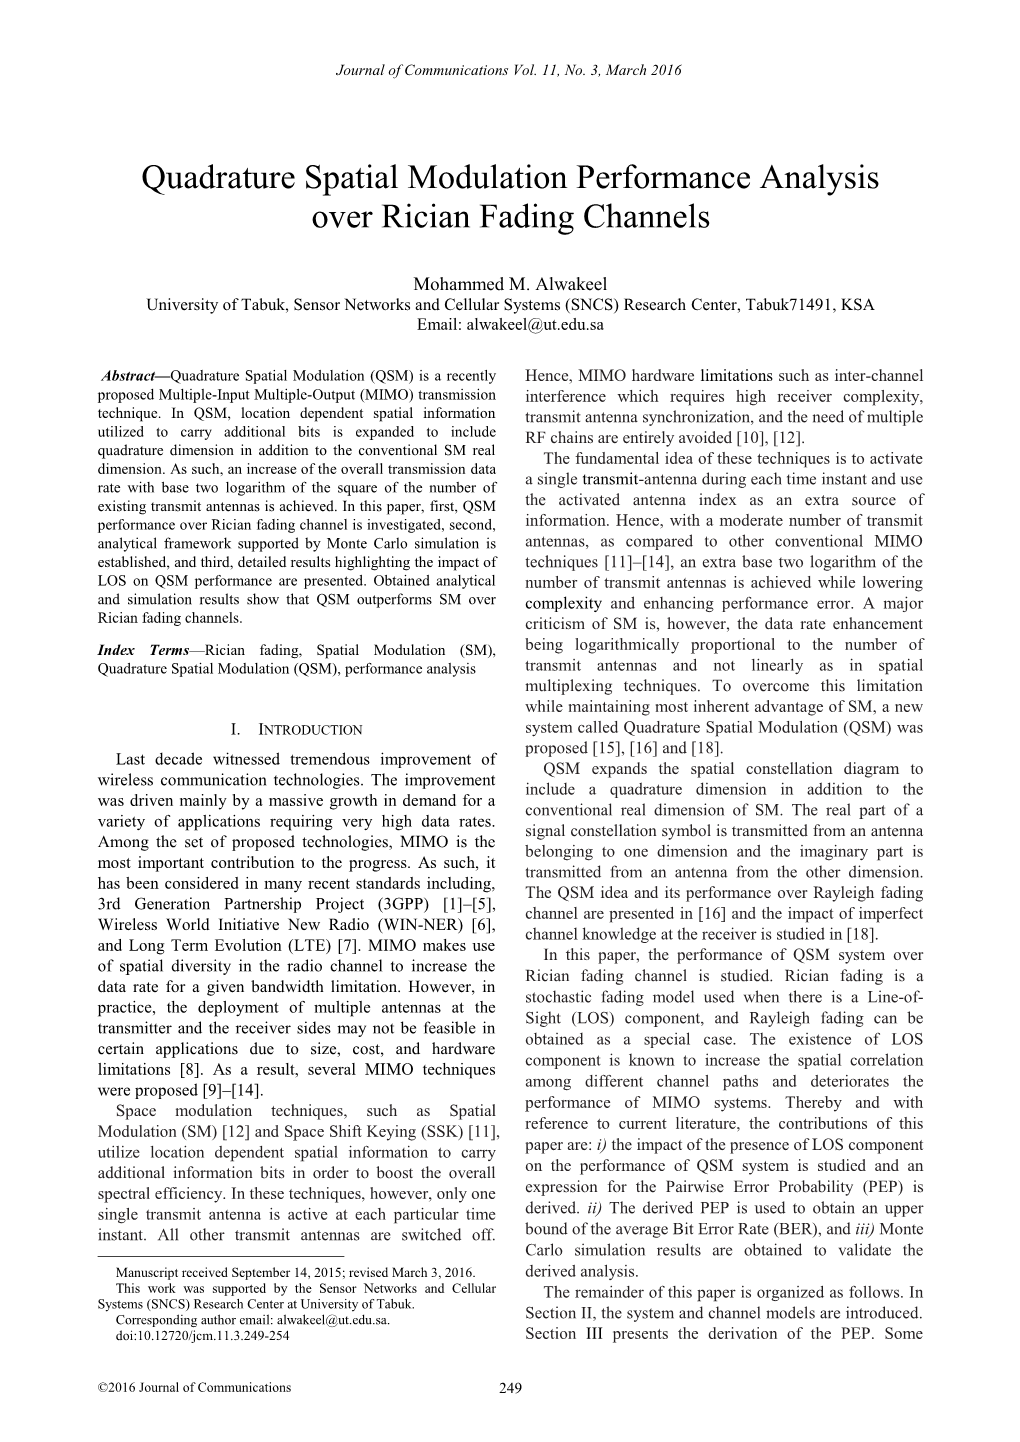 Quadrature Spatial Modulation Performance Analysis Over Rician Fading Channels